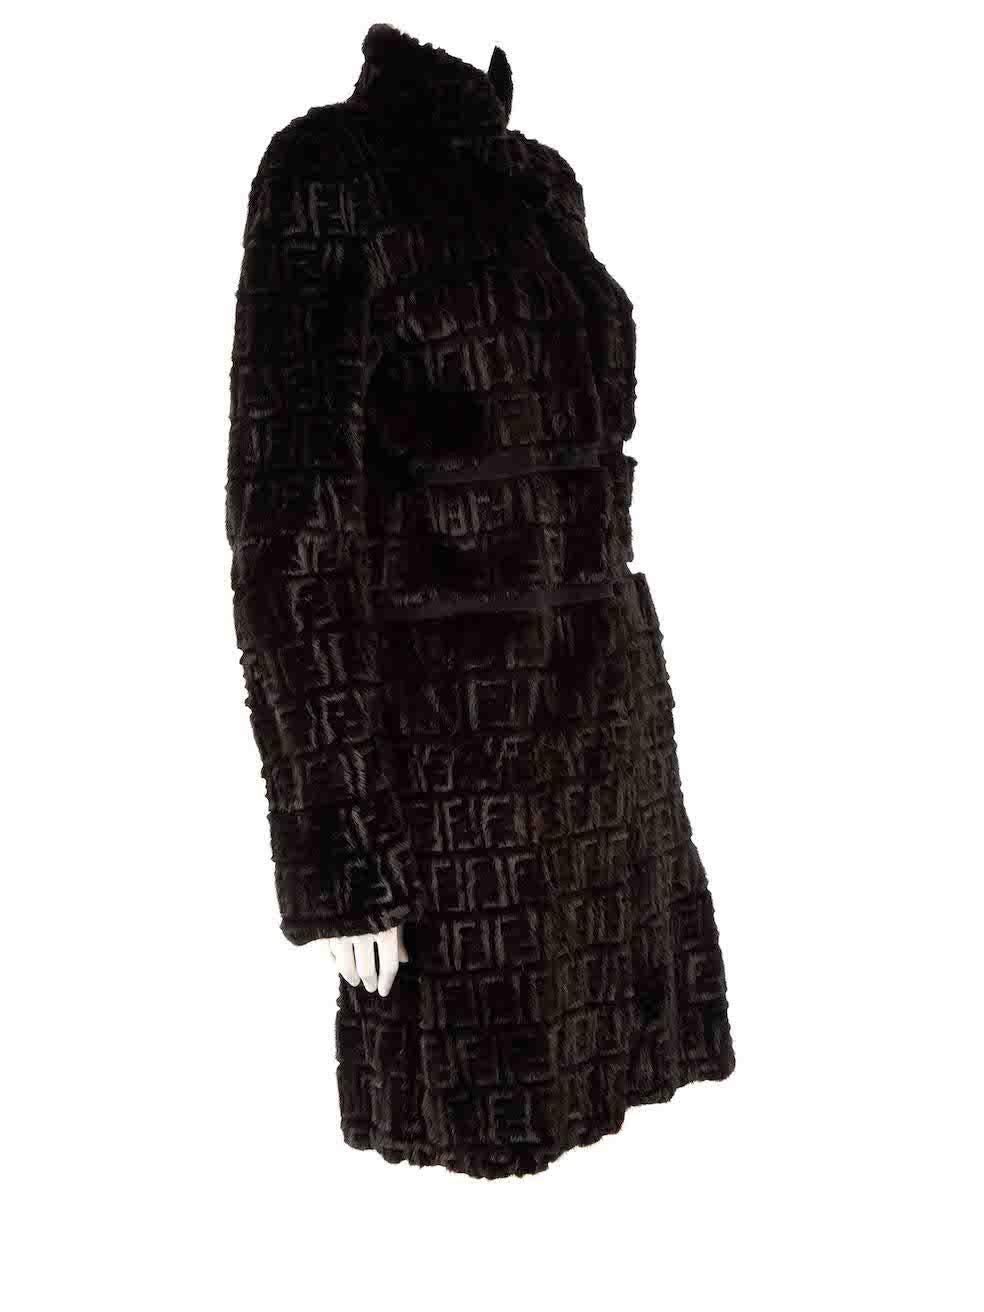 CONDITION is Good. Minor wear to dress is evident. Light wear to the underarm linings with strains to the seams. The second button is also missing on this used Fendi designer resale item.
 
Details
Vintage
Black
Fur
Coat
Logo pattern
Long